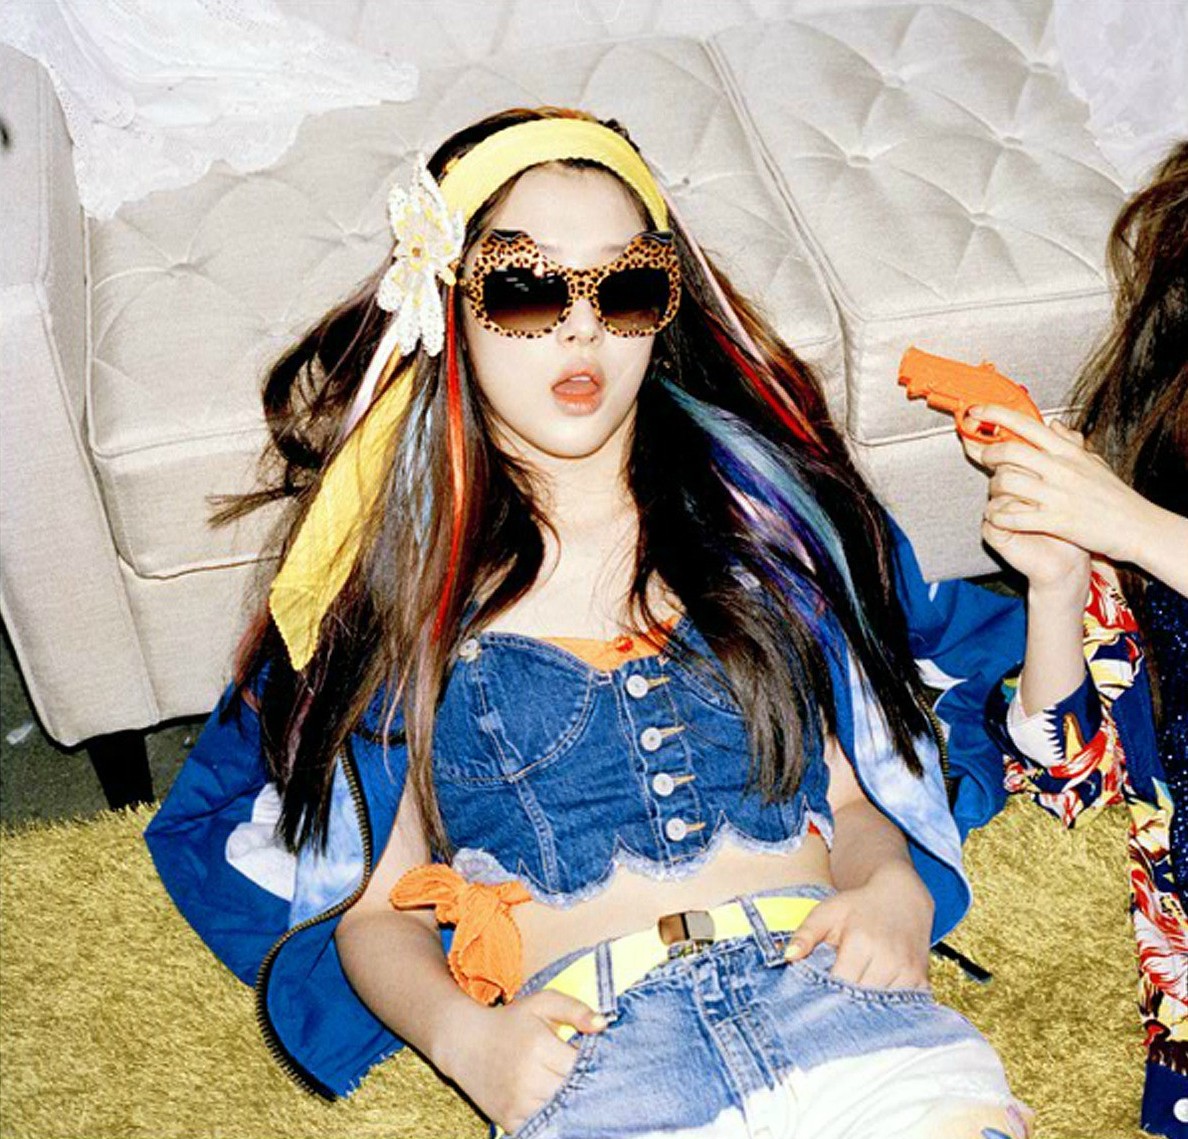 ... for kpop fanz: [PHOTO] f(x) - Electric Shock Official Photo Part 1